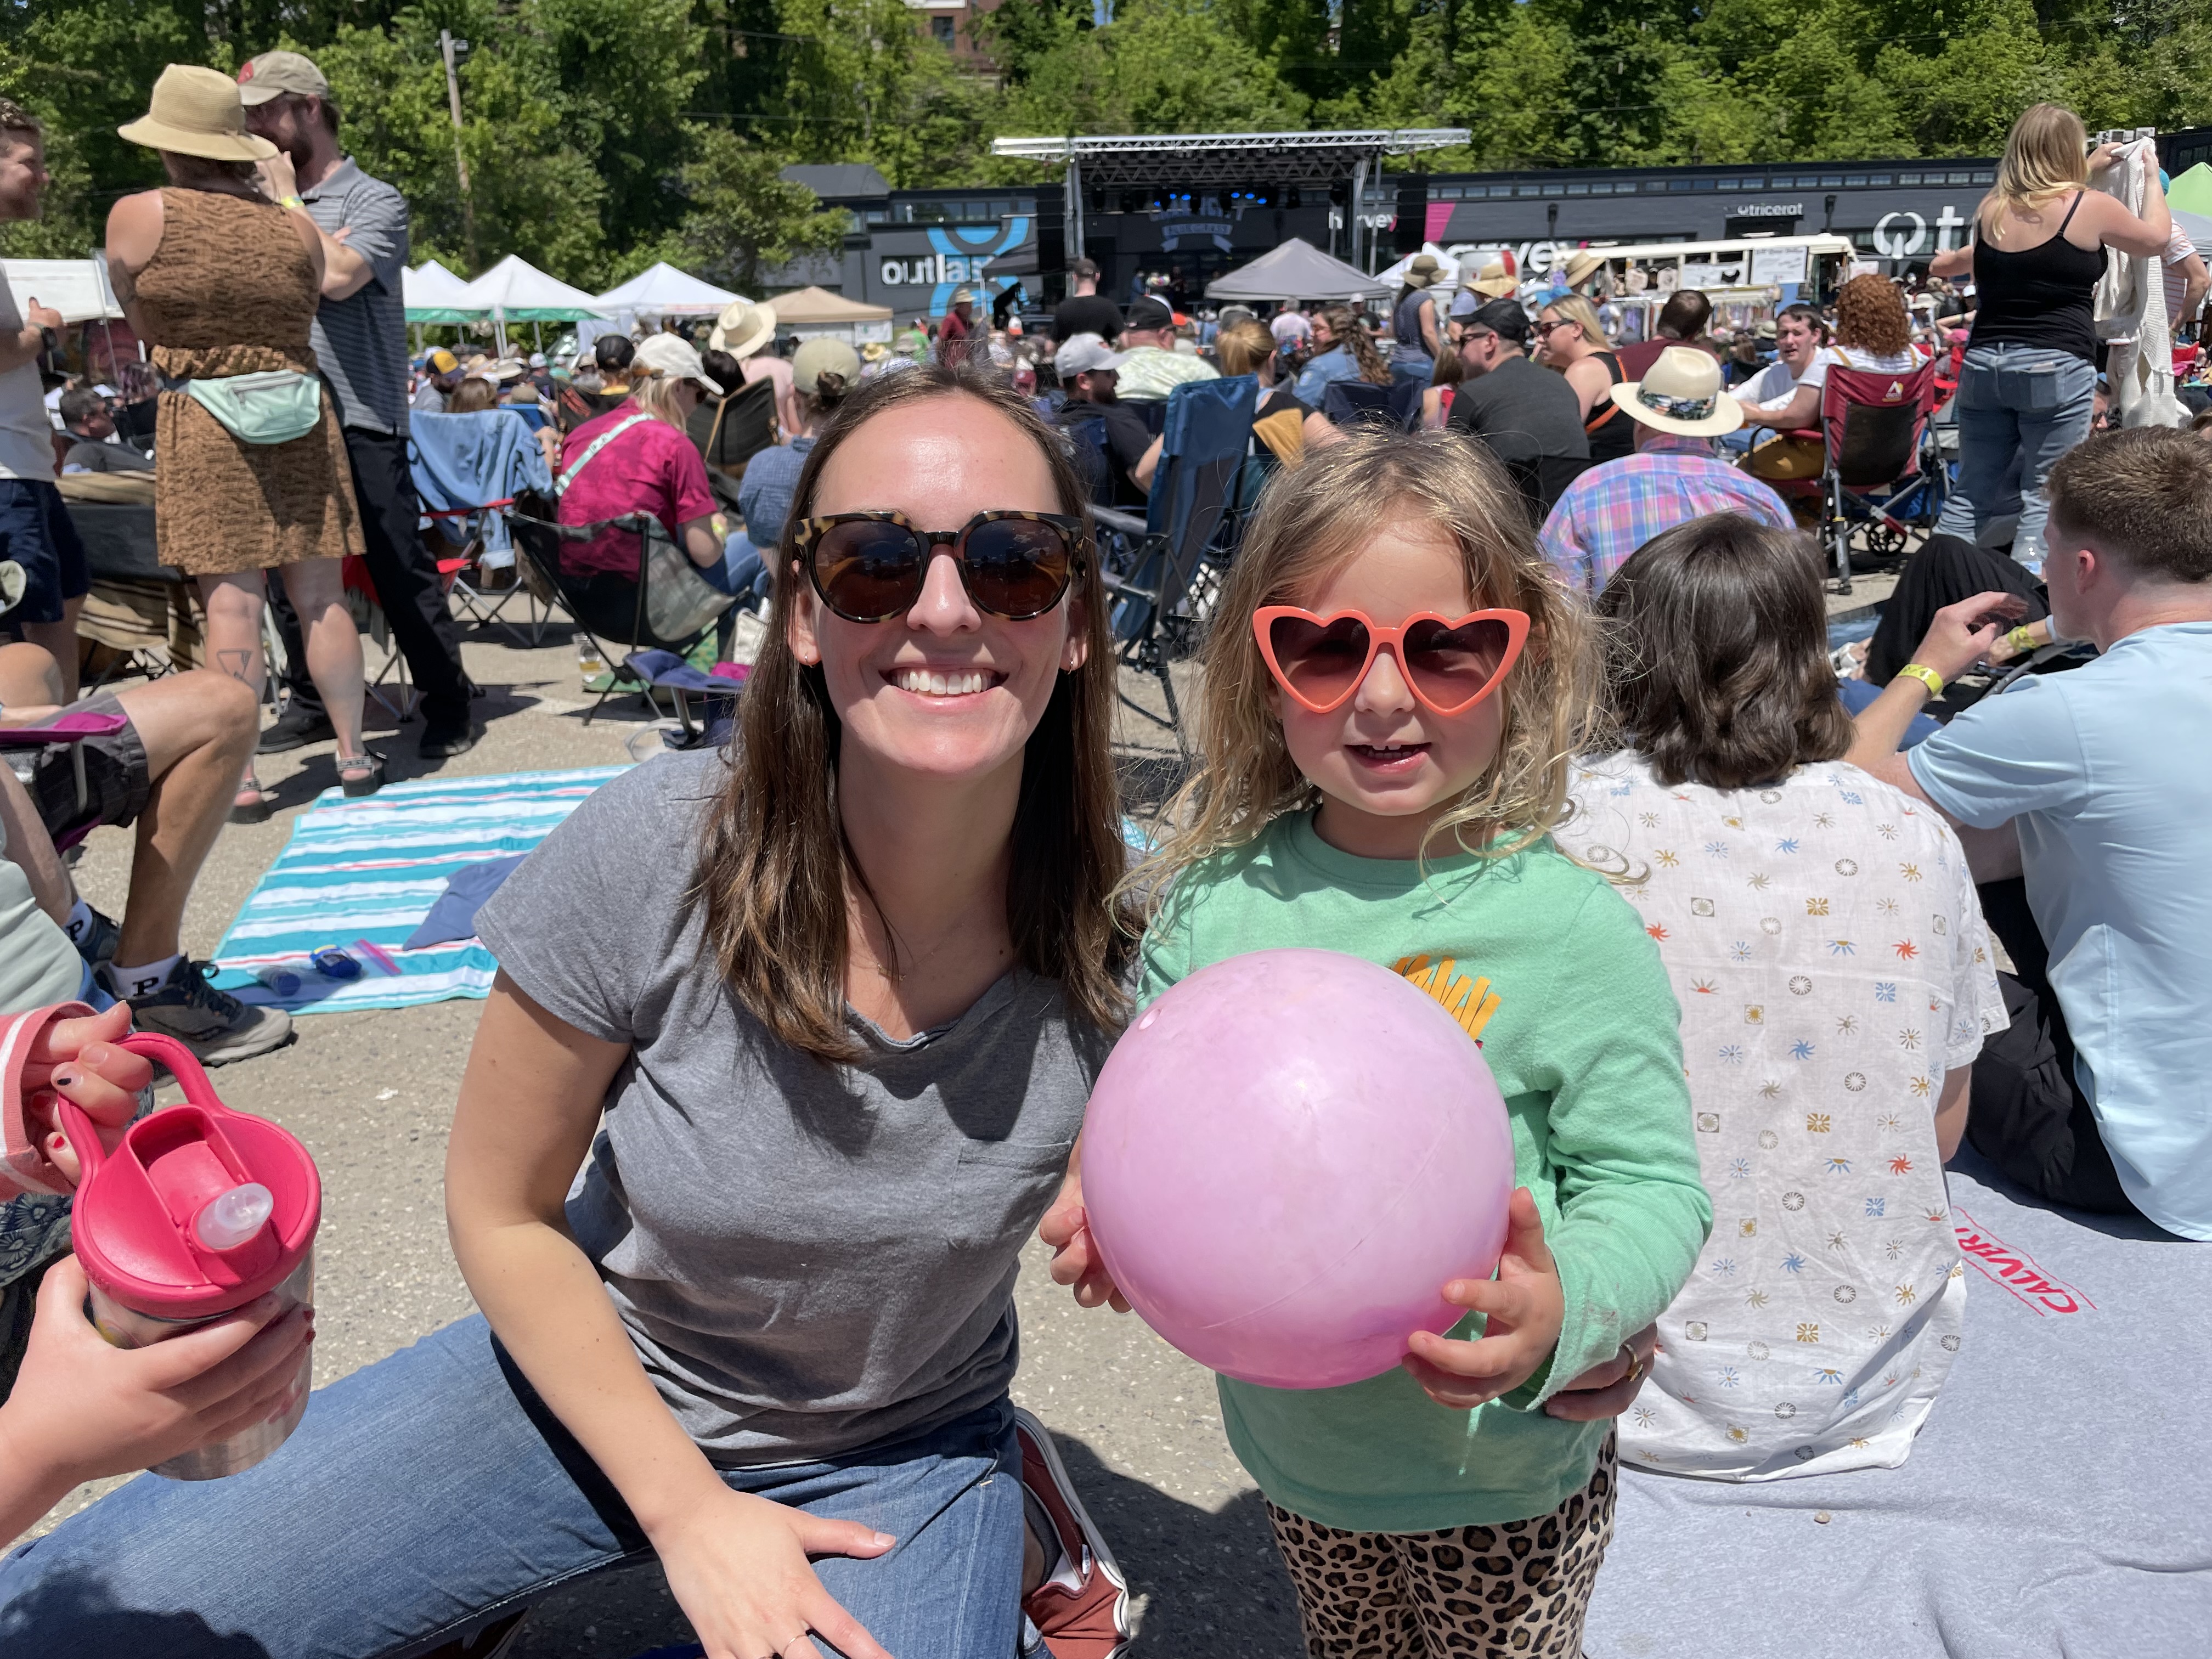 A woman and a young child holding a balloon smile at the camera. A crowd of people and stage are visible in the background.